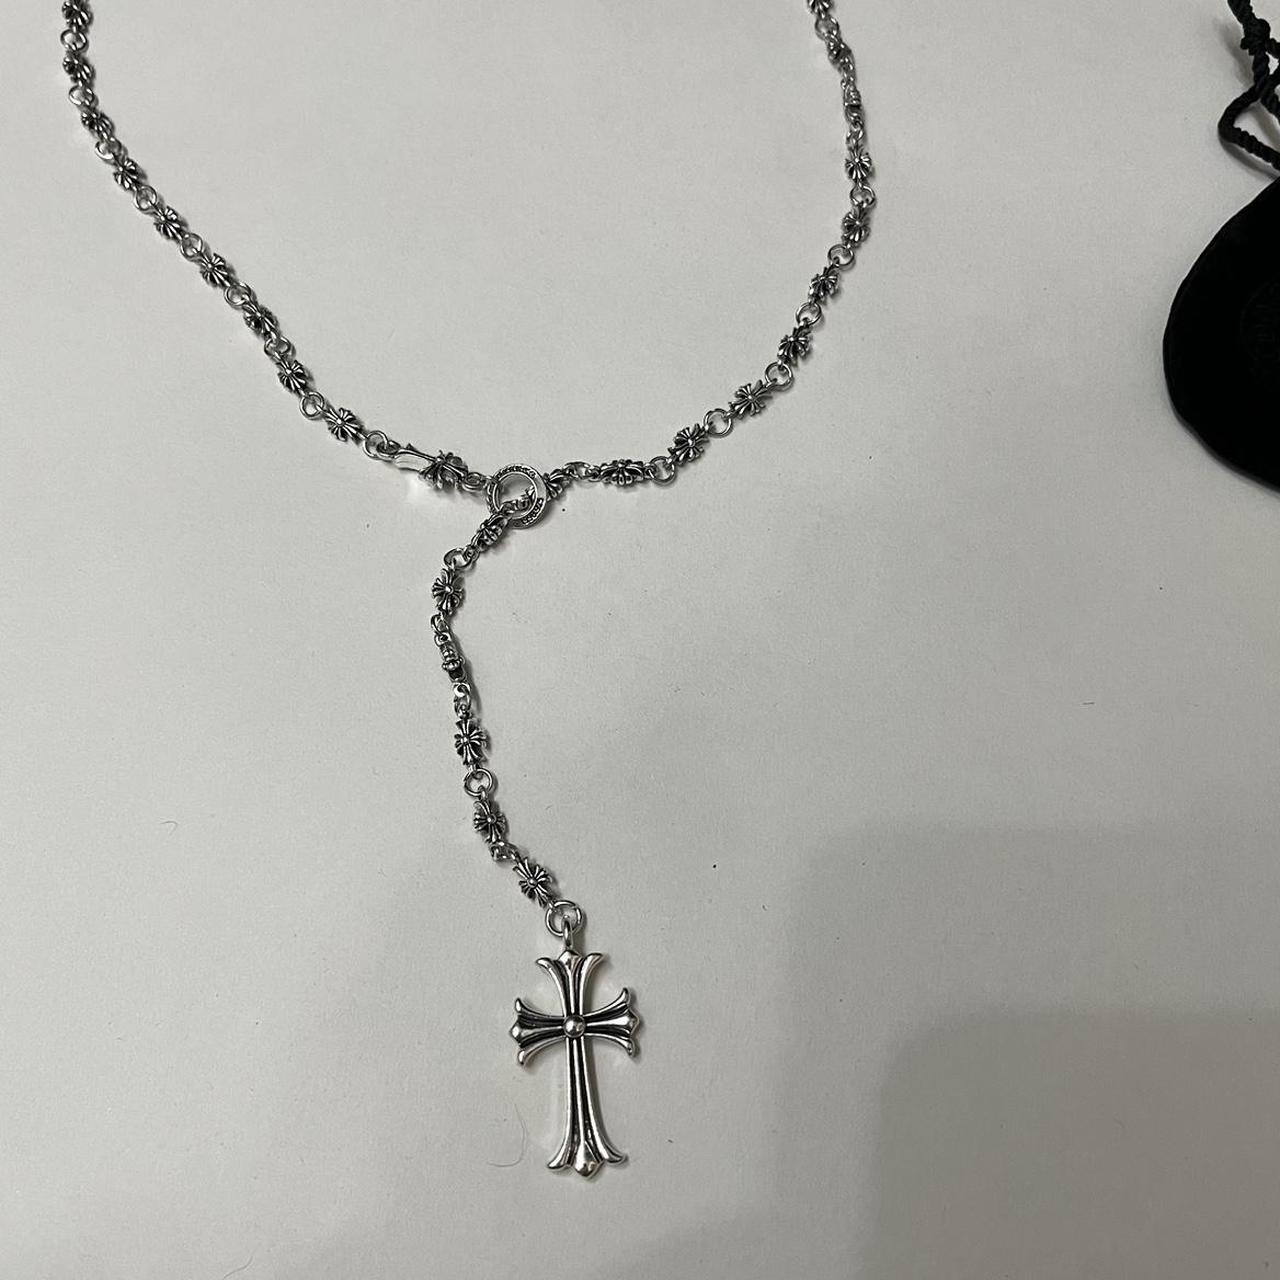 Chrome hearts rosary necklace This chrome hearts... - Depop